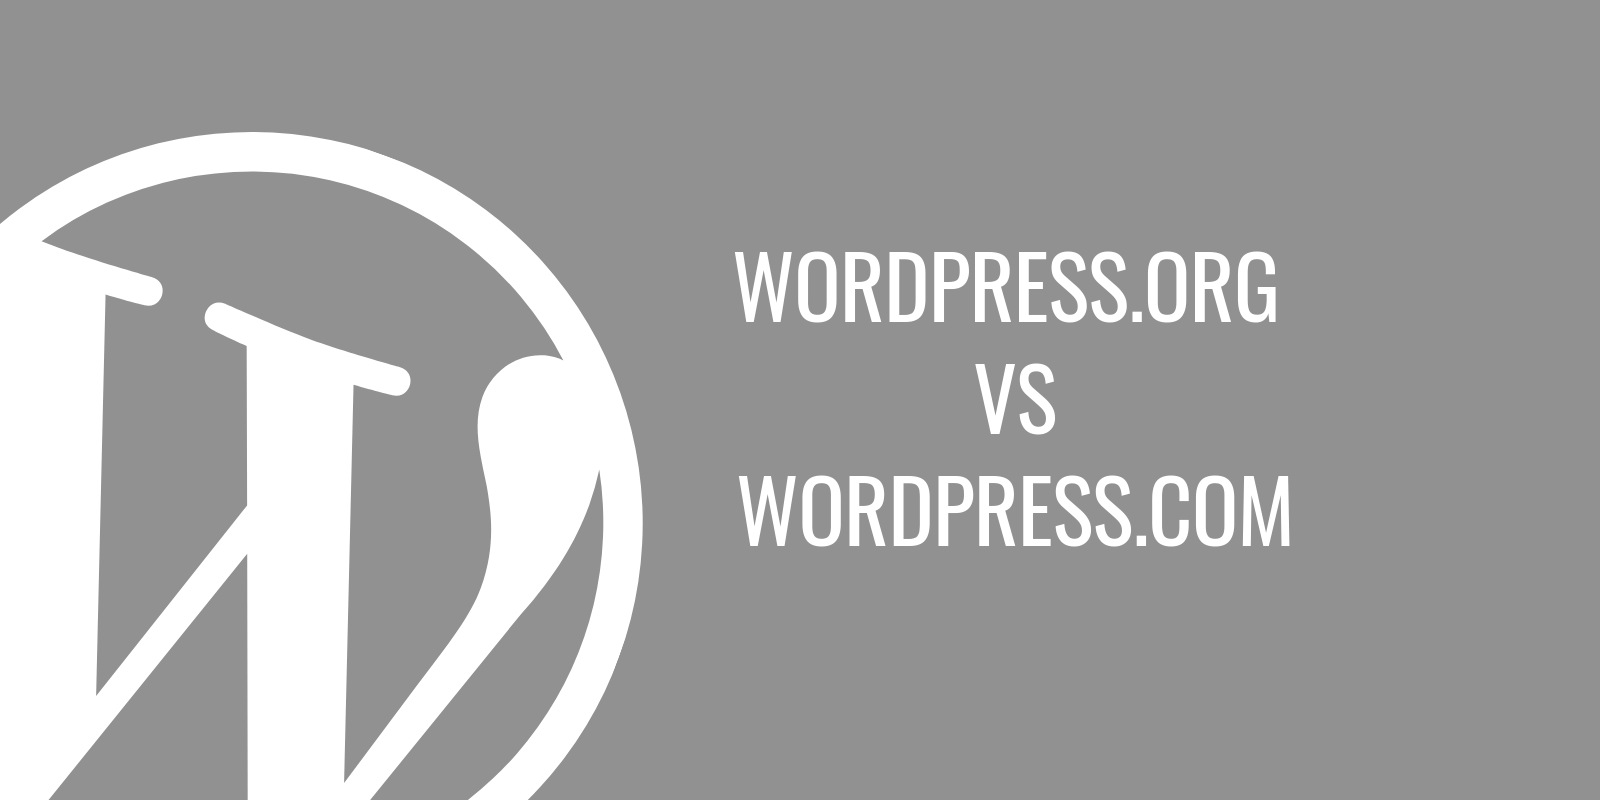 Wordpress.org Logo - WordPress.org vs WordPress.com - what are the differences? | jurosko.com